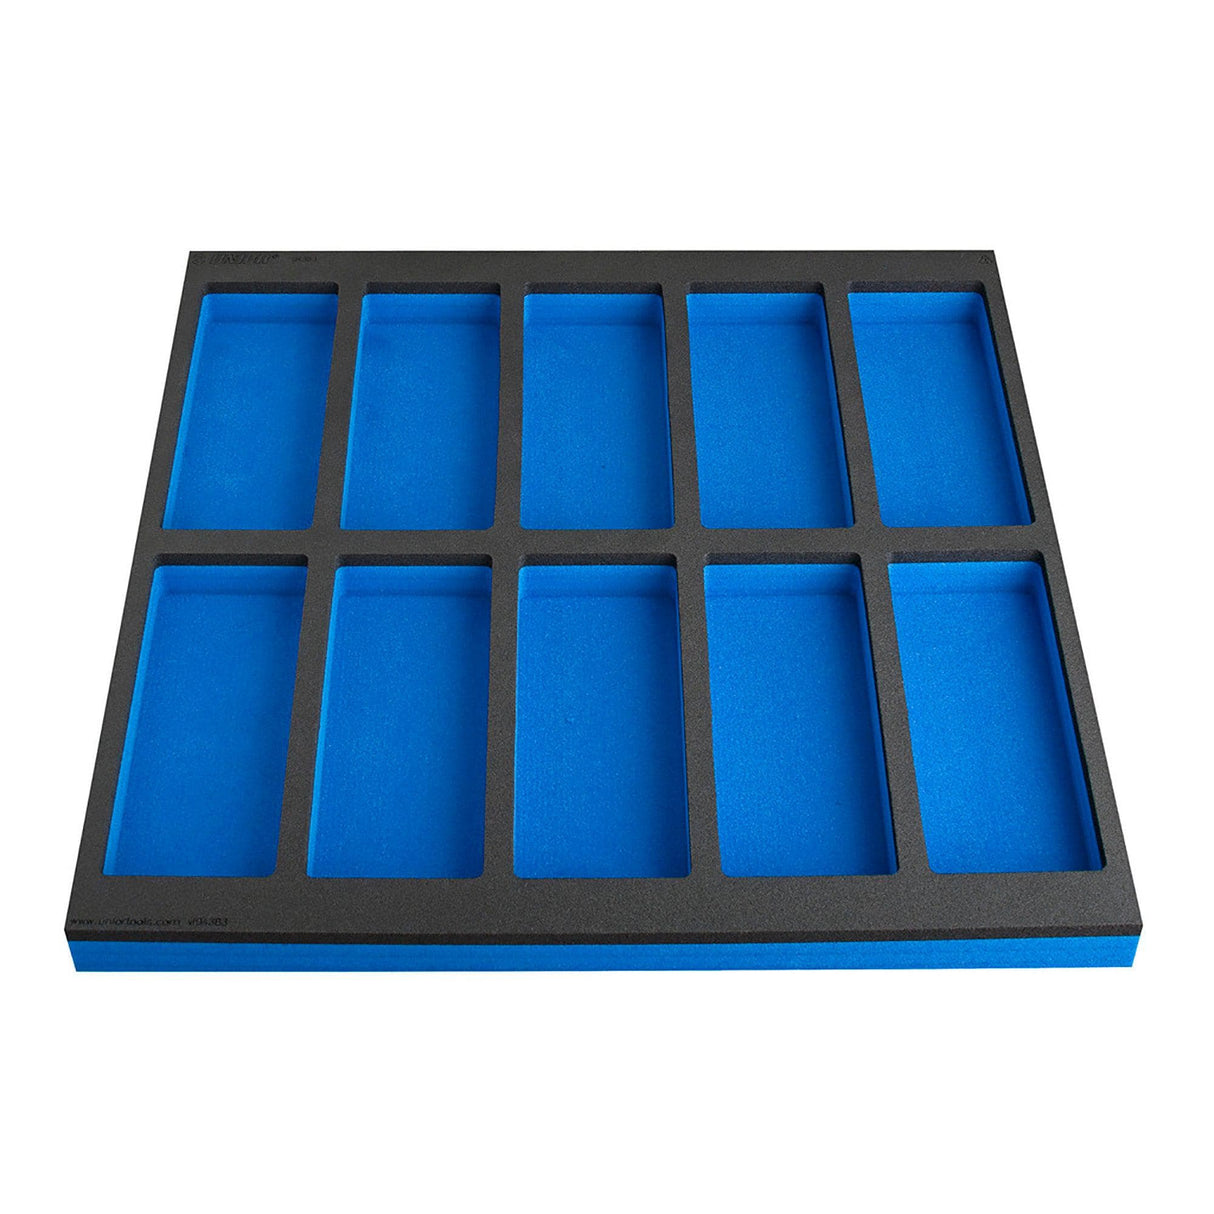 Unior Sos Tool Tray With Compartment For Work Bench Big Tool Chest (10 Compartments):  570 X 562Mm